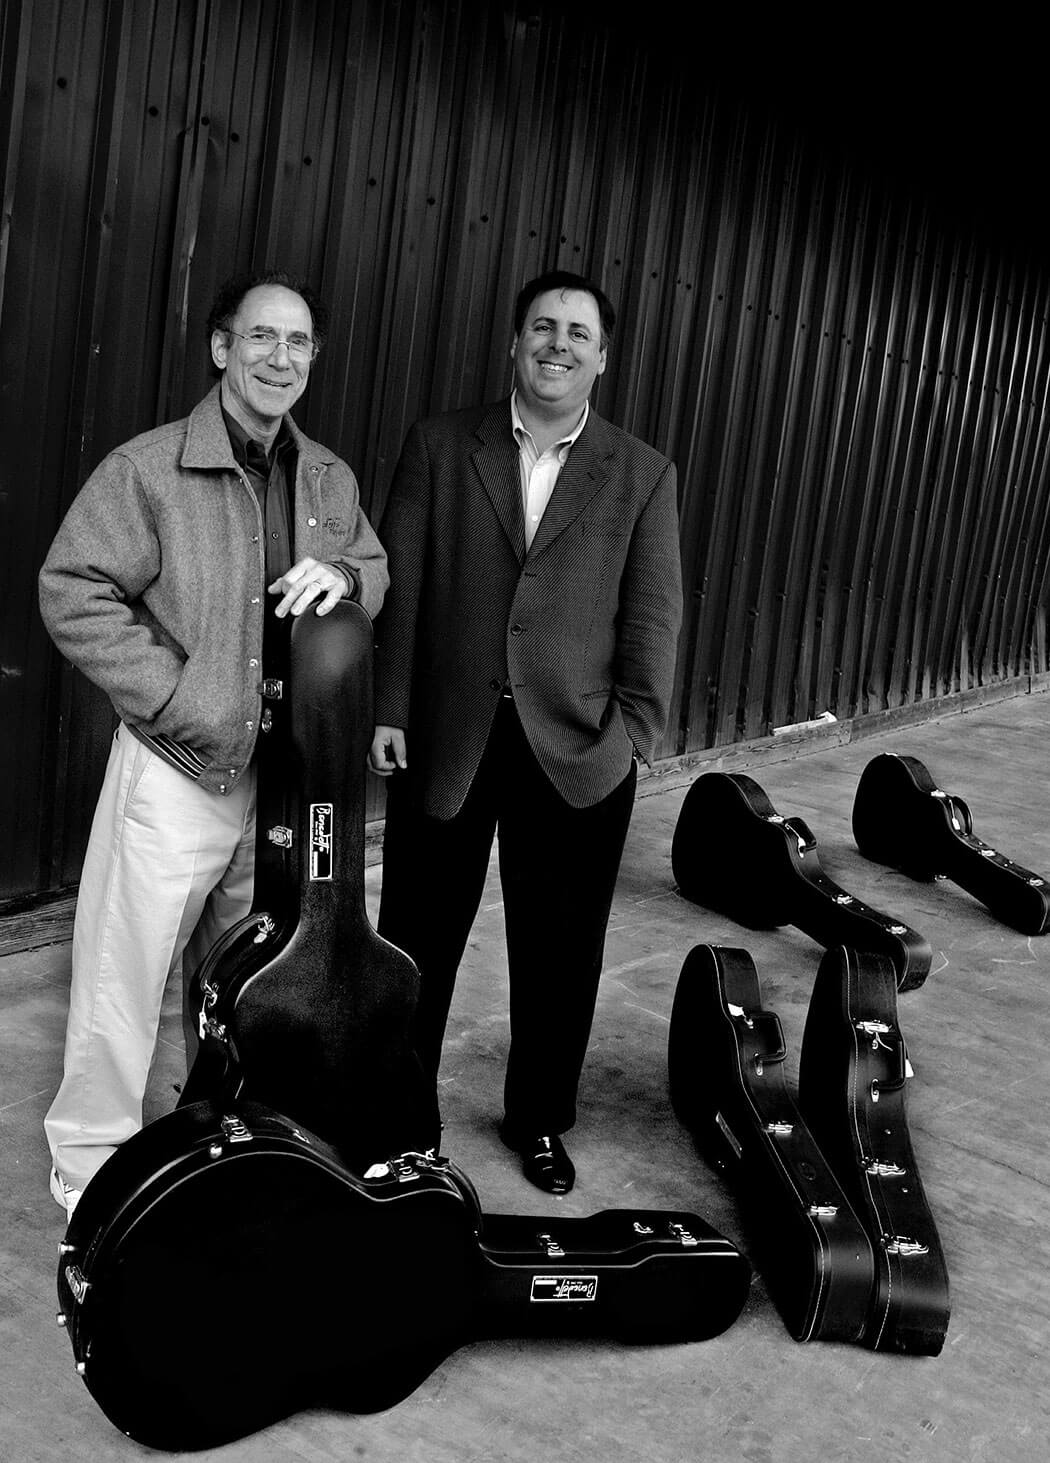 Robert Benedetto and Howard Paul stand amongst many Benedetto Guitars